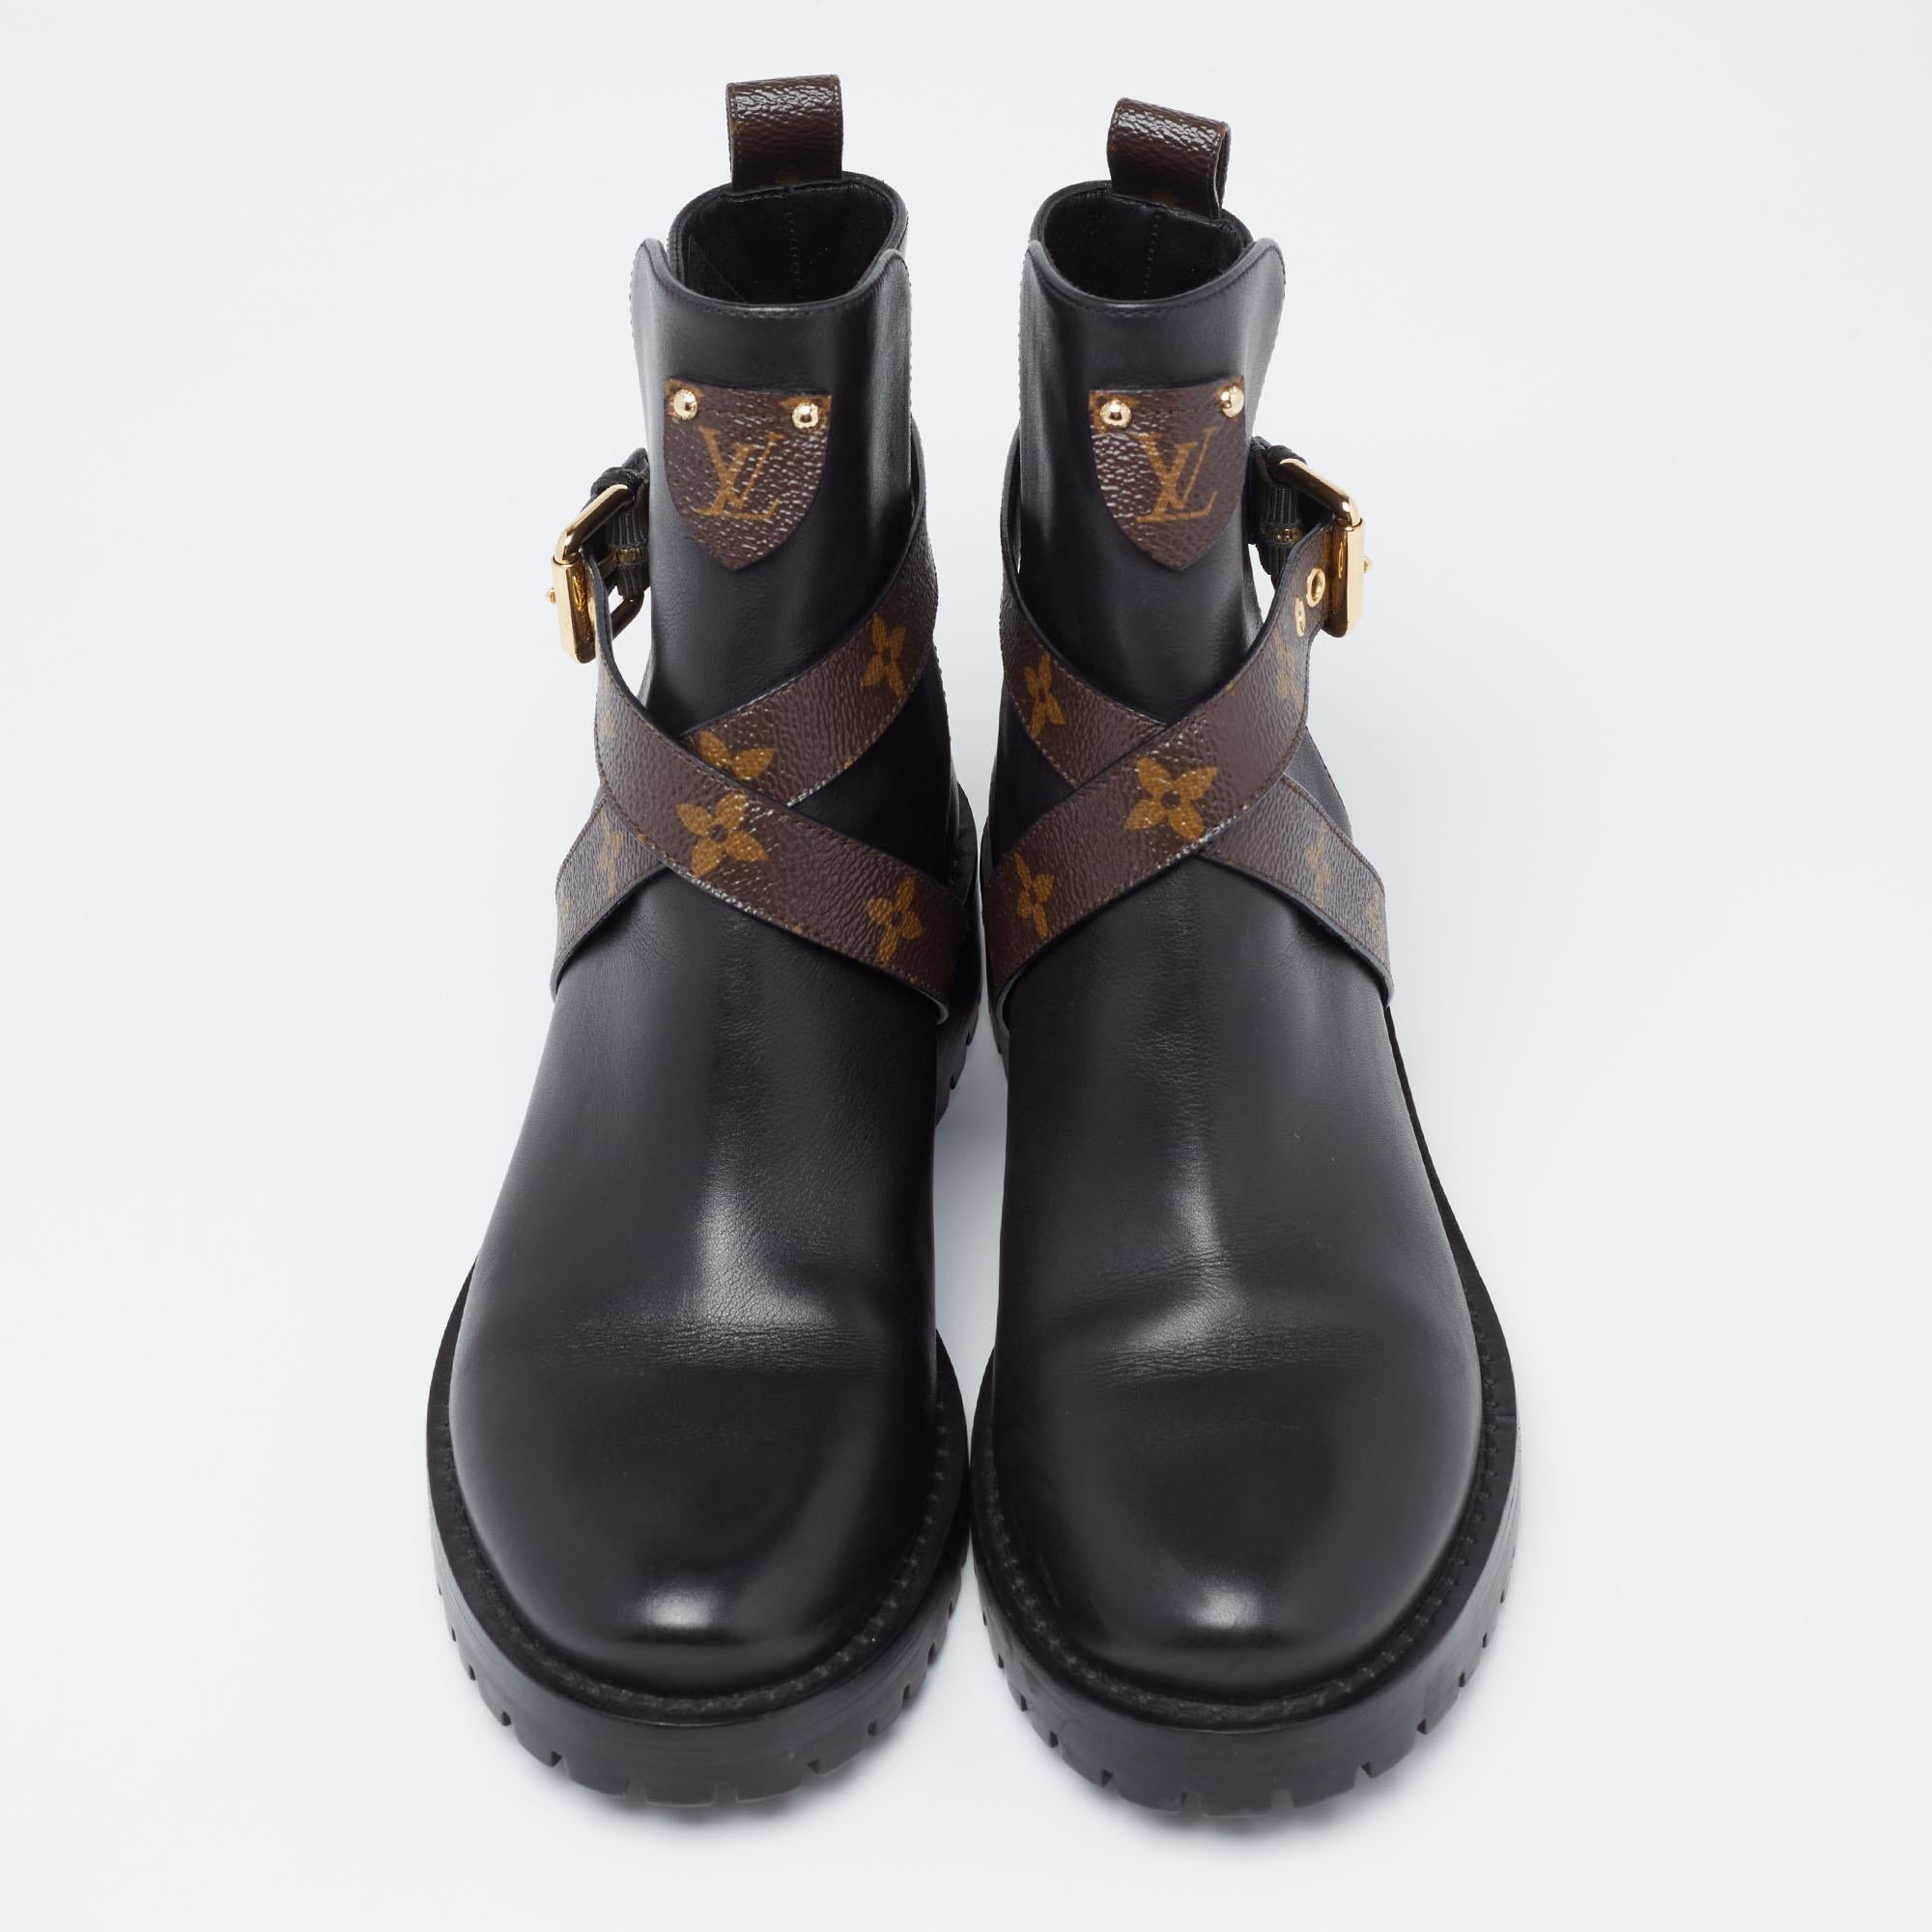 The minimalistic design of these Louis Vuitton boots gets a luxury update with the monogram detailed criss-cross straps and the branded tag. Created from leather, the appeal of these shoes is truly ever-lasting. The ankle buckle closure and the loop